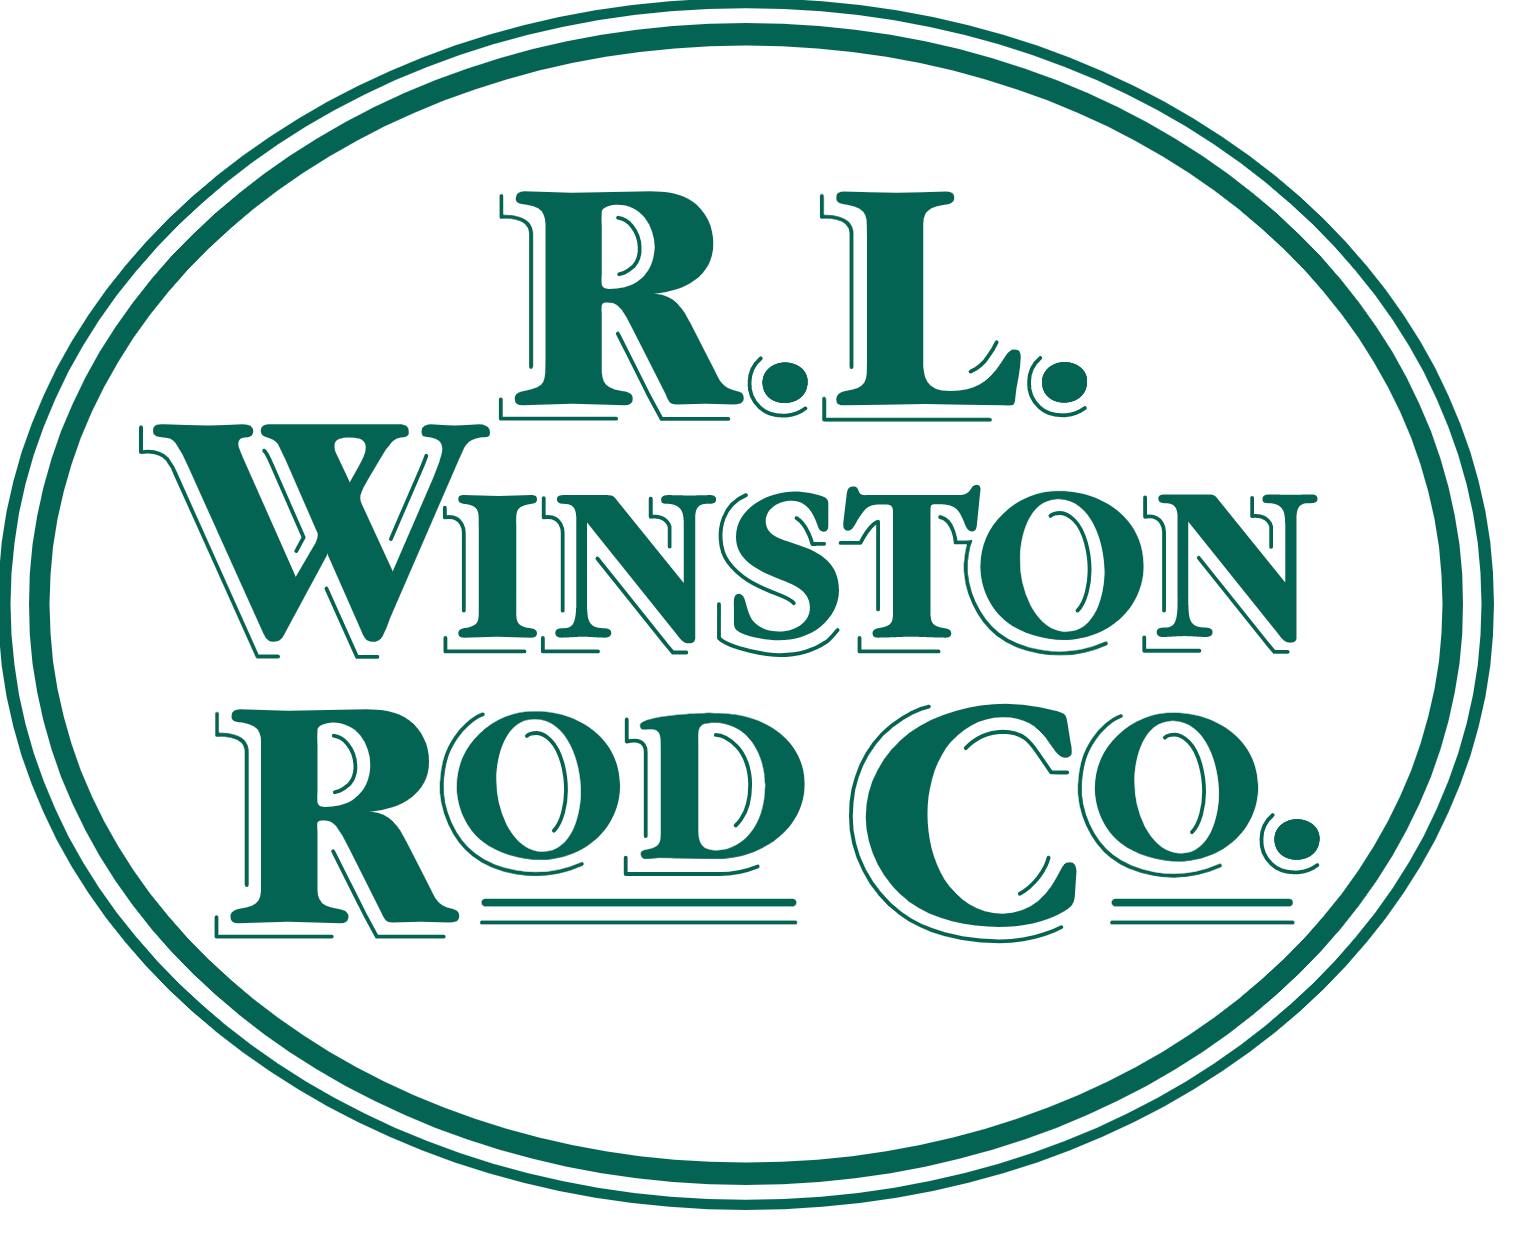 The Winston logo which reads "R. L. Winston Rod Co." in green font within a green circle. 